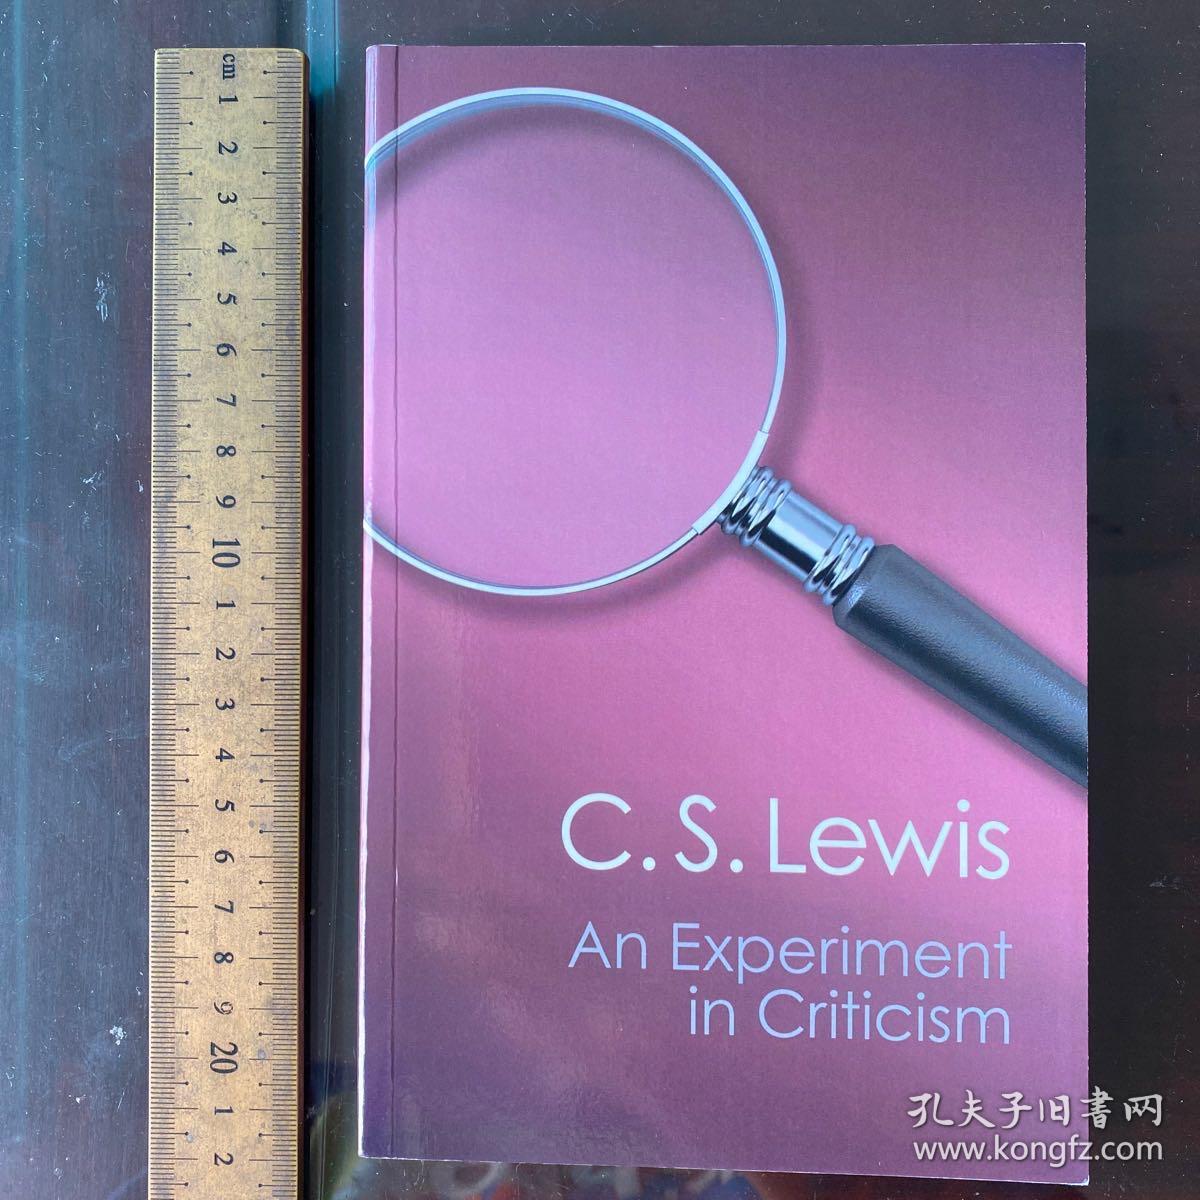 An experiment in criticism C. S Lewis literary theory theories thought thoughts history 英文原版